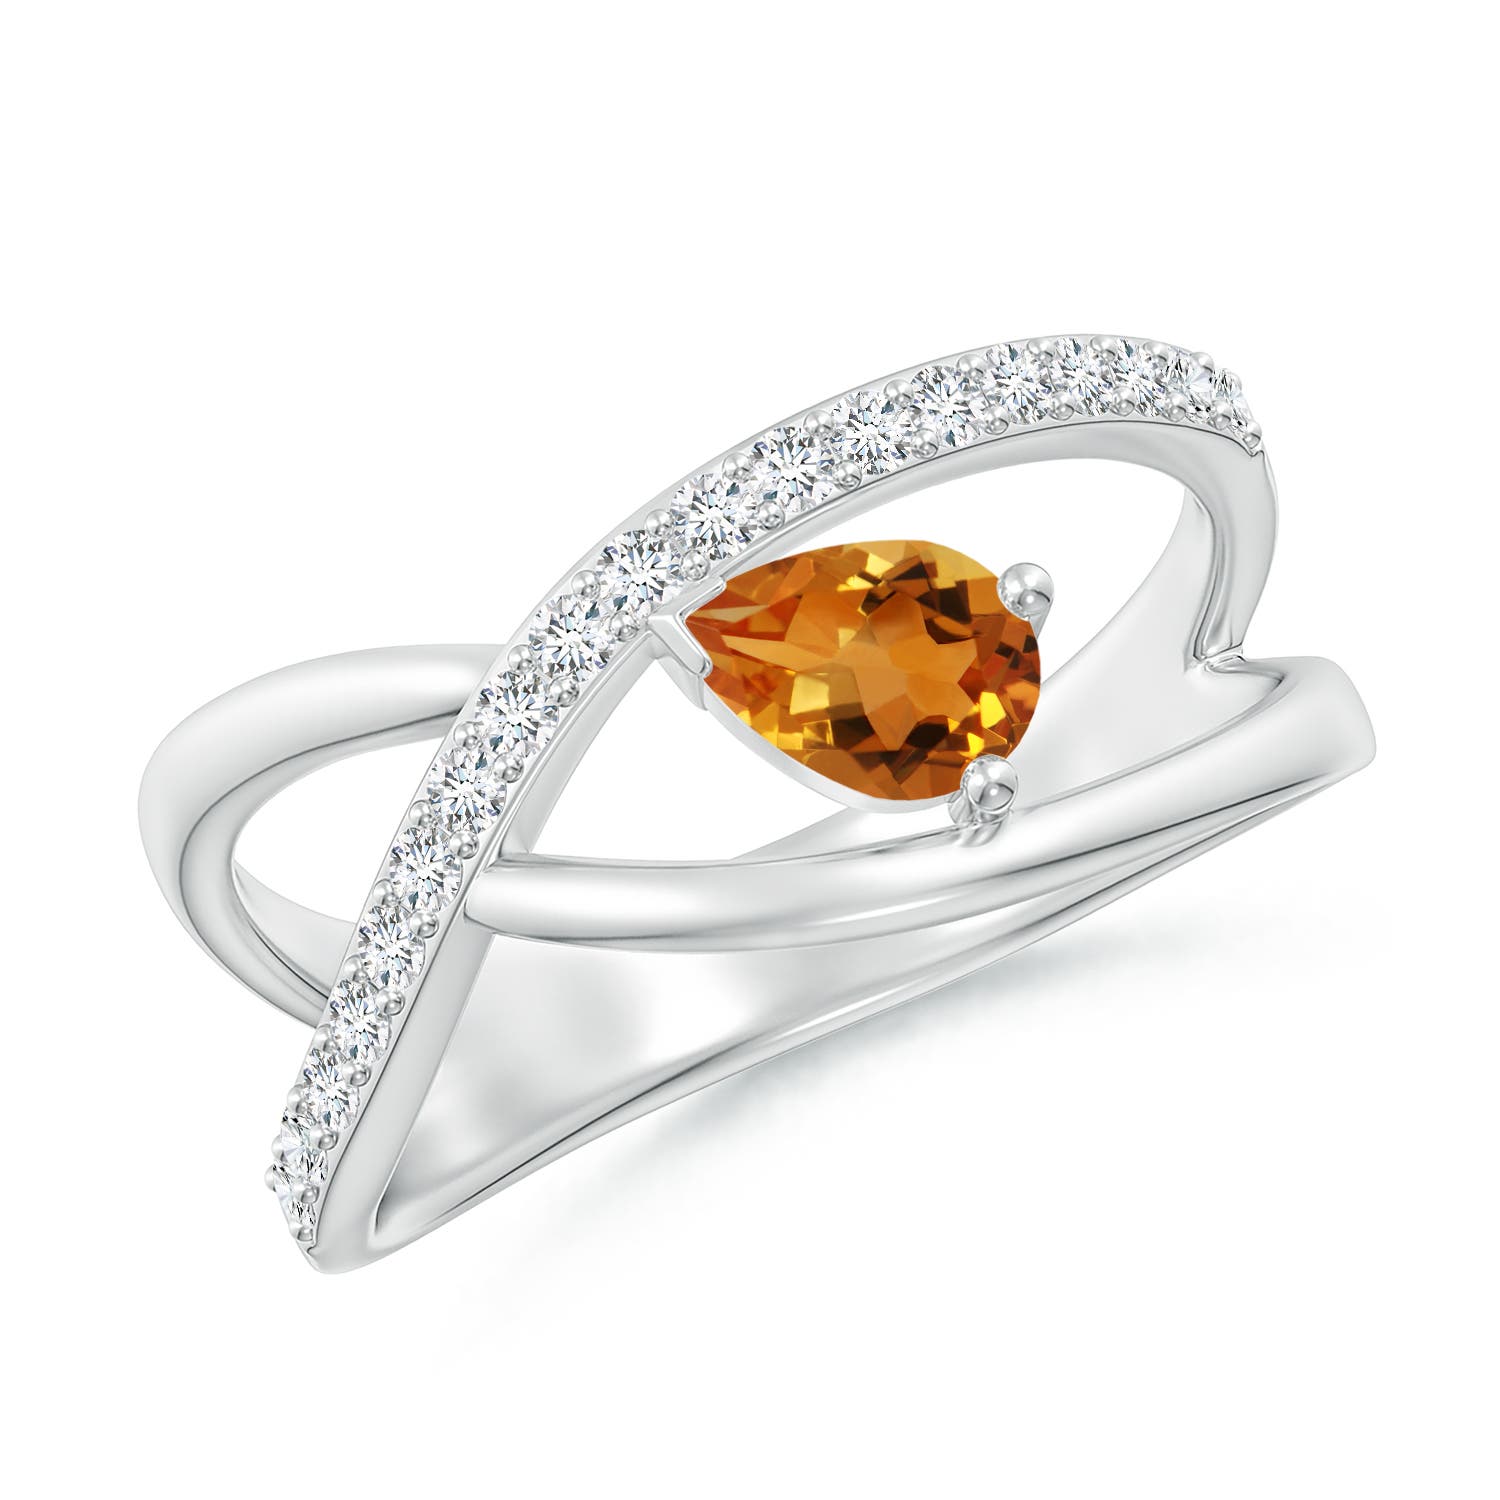 Criss Cross Pear Shaped Citrine Ring with Diamond Accents